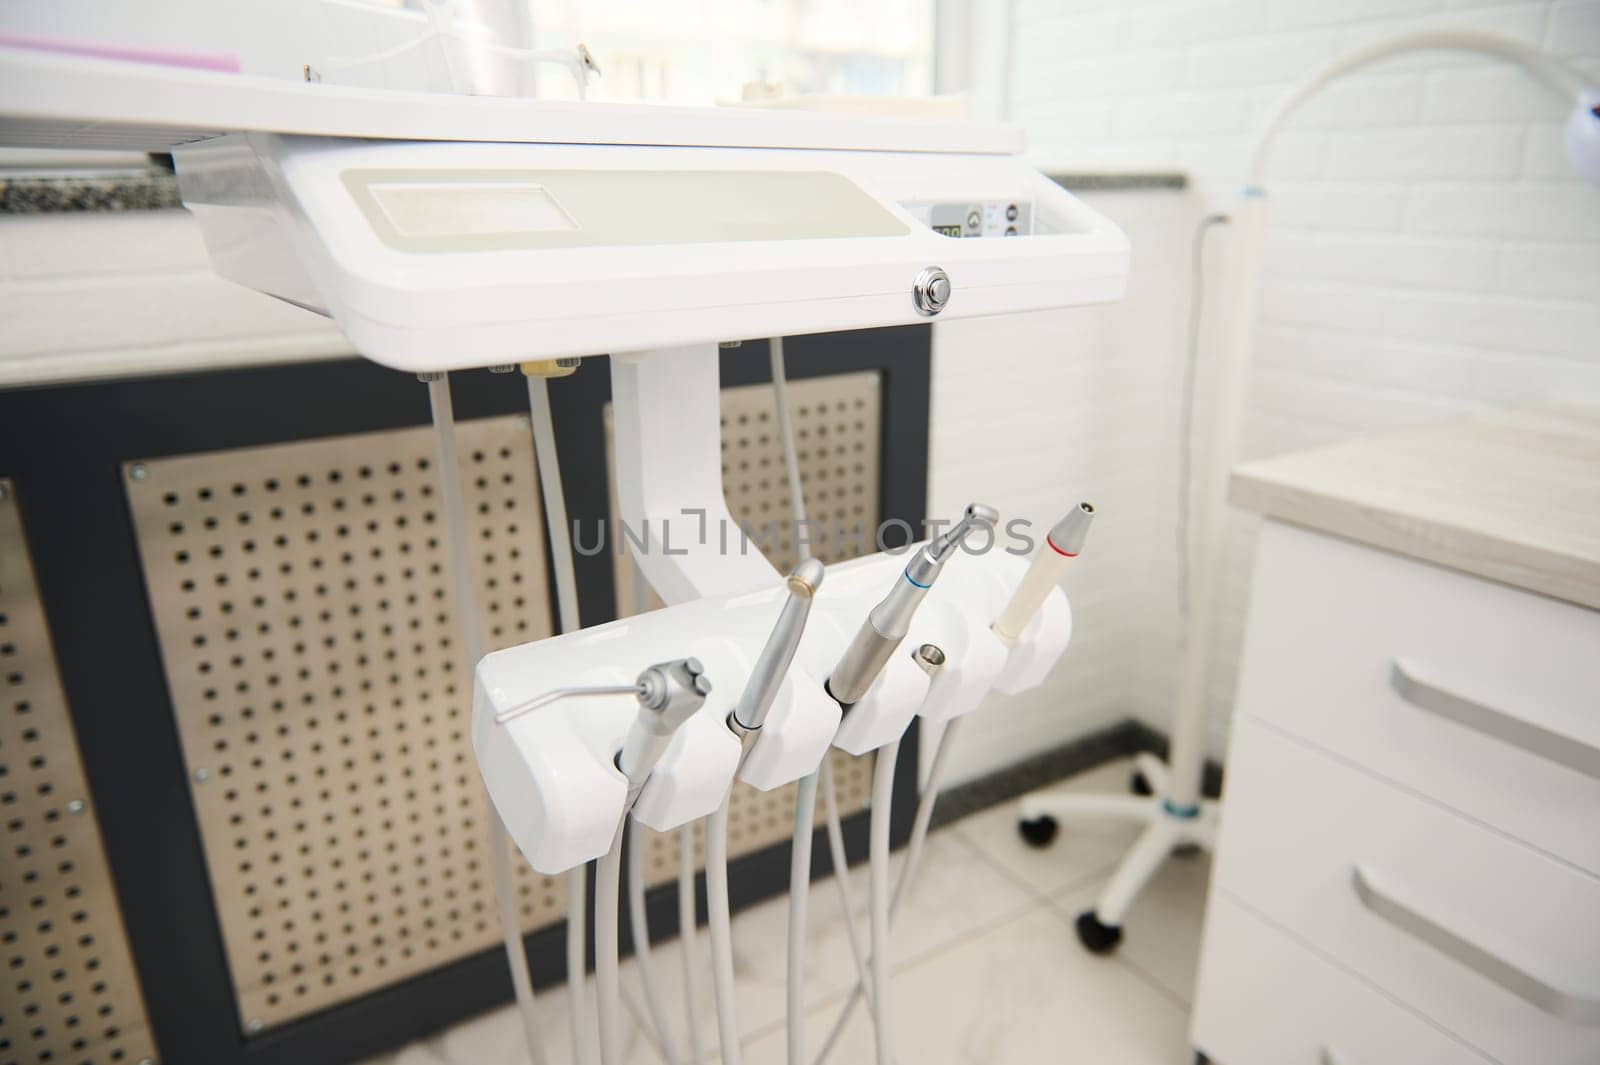 Modern dental equipment in while light dental office interior. Dentistry. Medical clinic. Outpatient hospital. Ad space by artgf